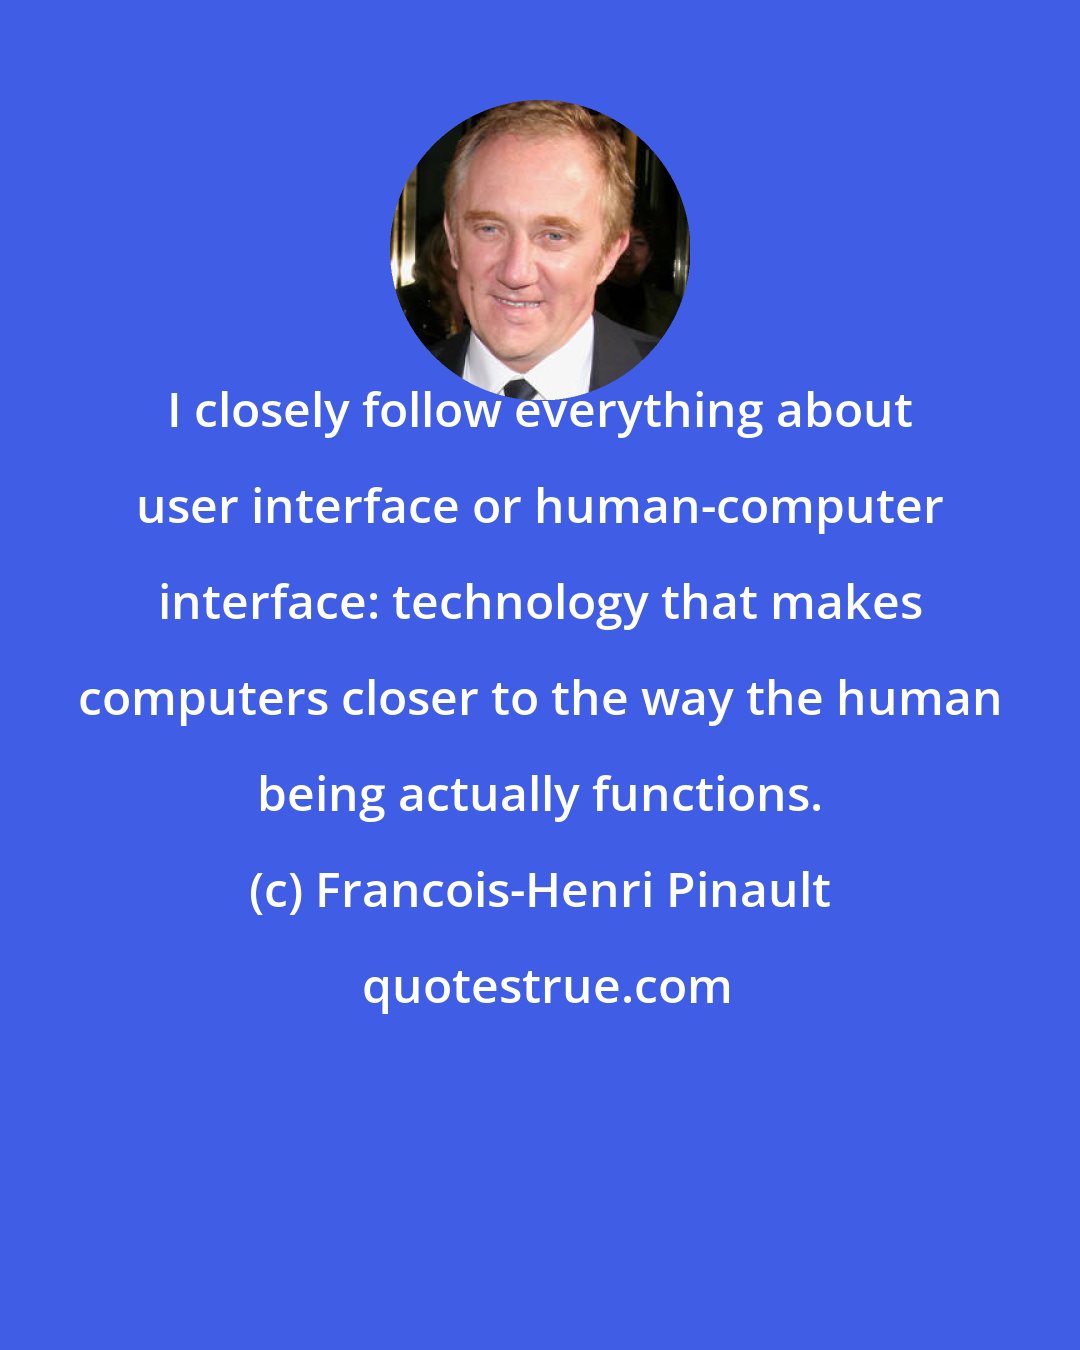 Francois-Henri Pinault: I closely follow everything about user interface or human-computer interface: technology that makes computers closer to the way the human being actually functions.